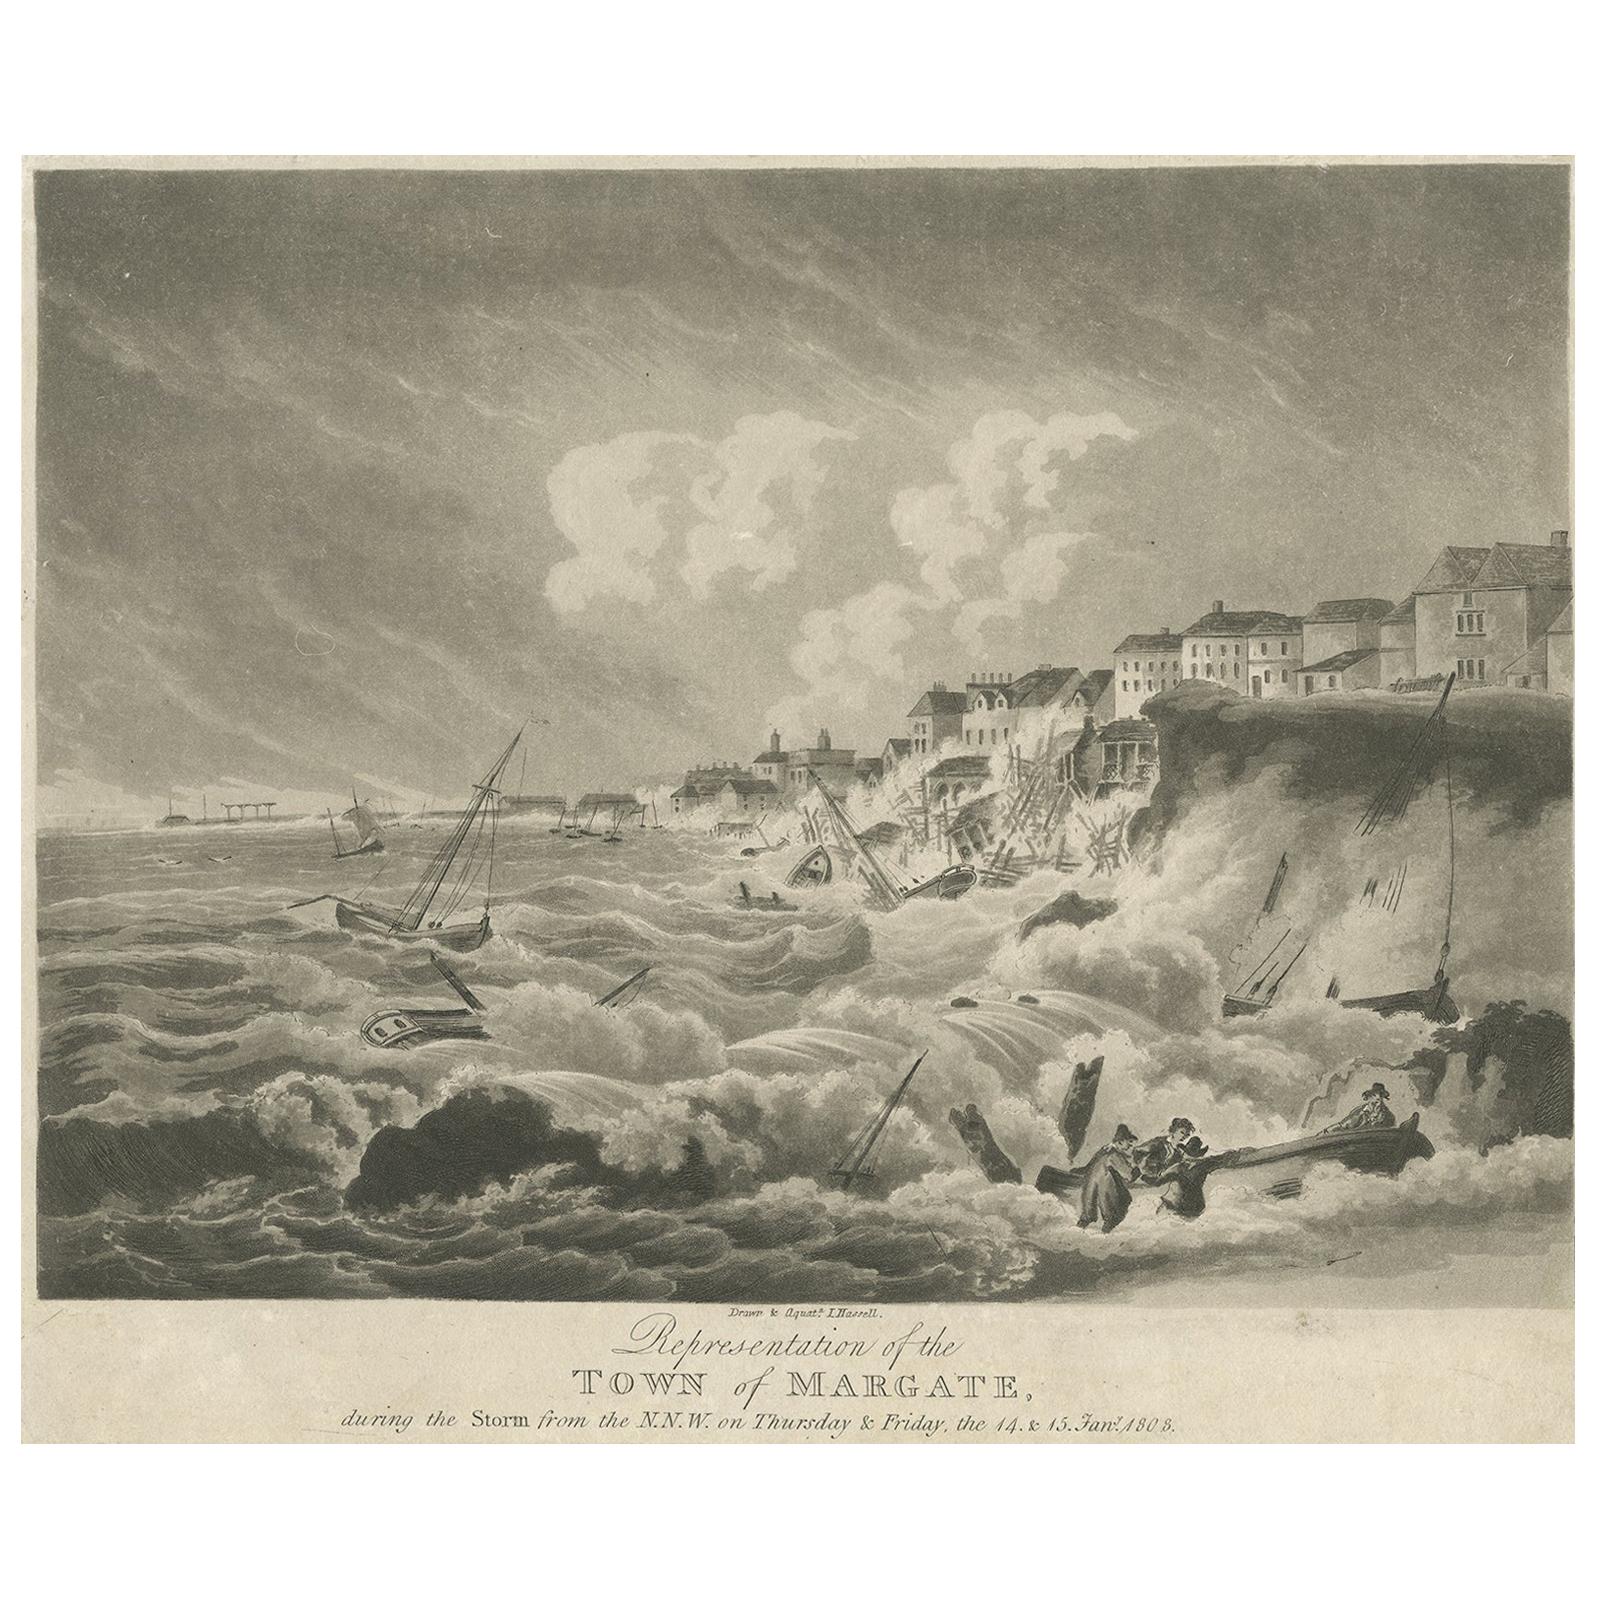 Antique Print of Margate During the Storm by Hassell, circa 1808